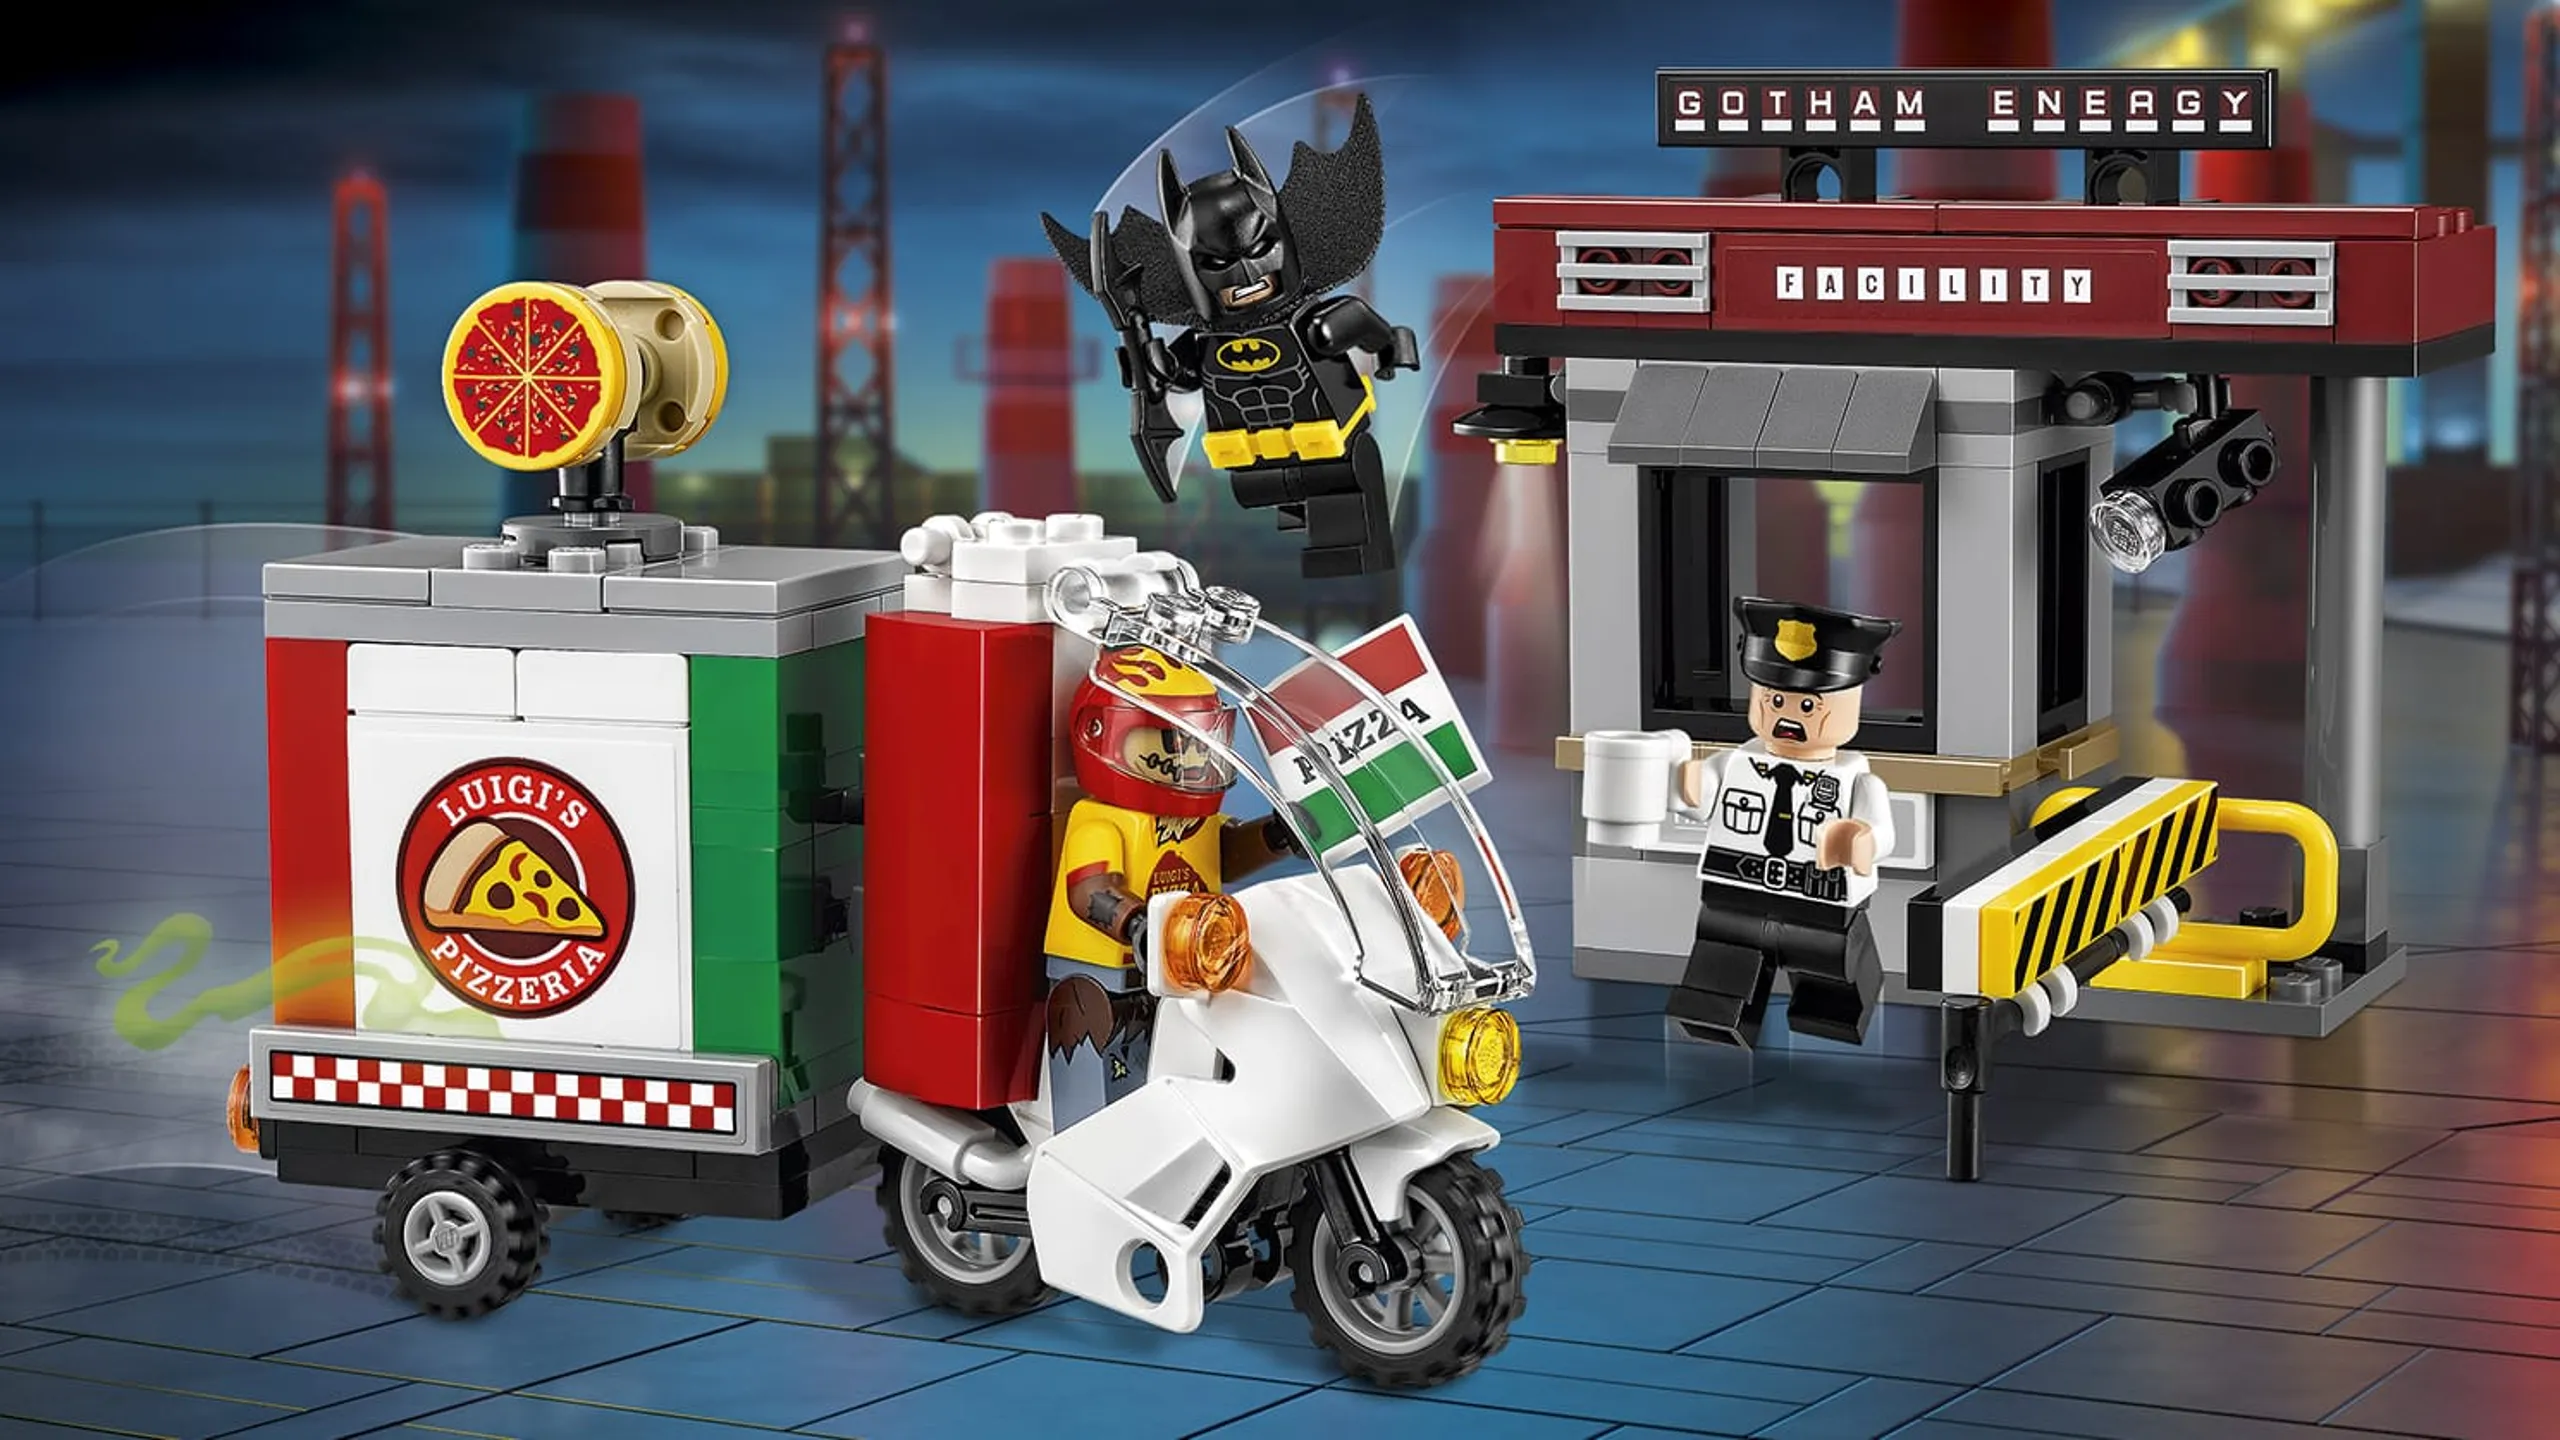 LEGO Batman Movie Scarecrow Special Delivery - 70910 - Scarecrow disguises as a pizza delivery and tries to sabotage Gotham Energy Facility with fear gas but Batman come to the rescue.